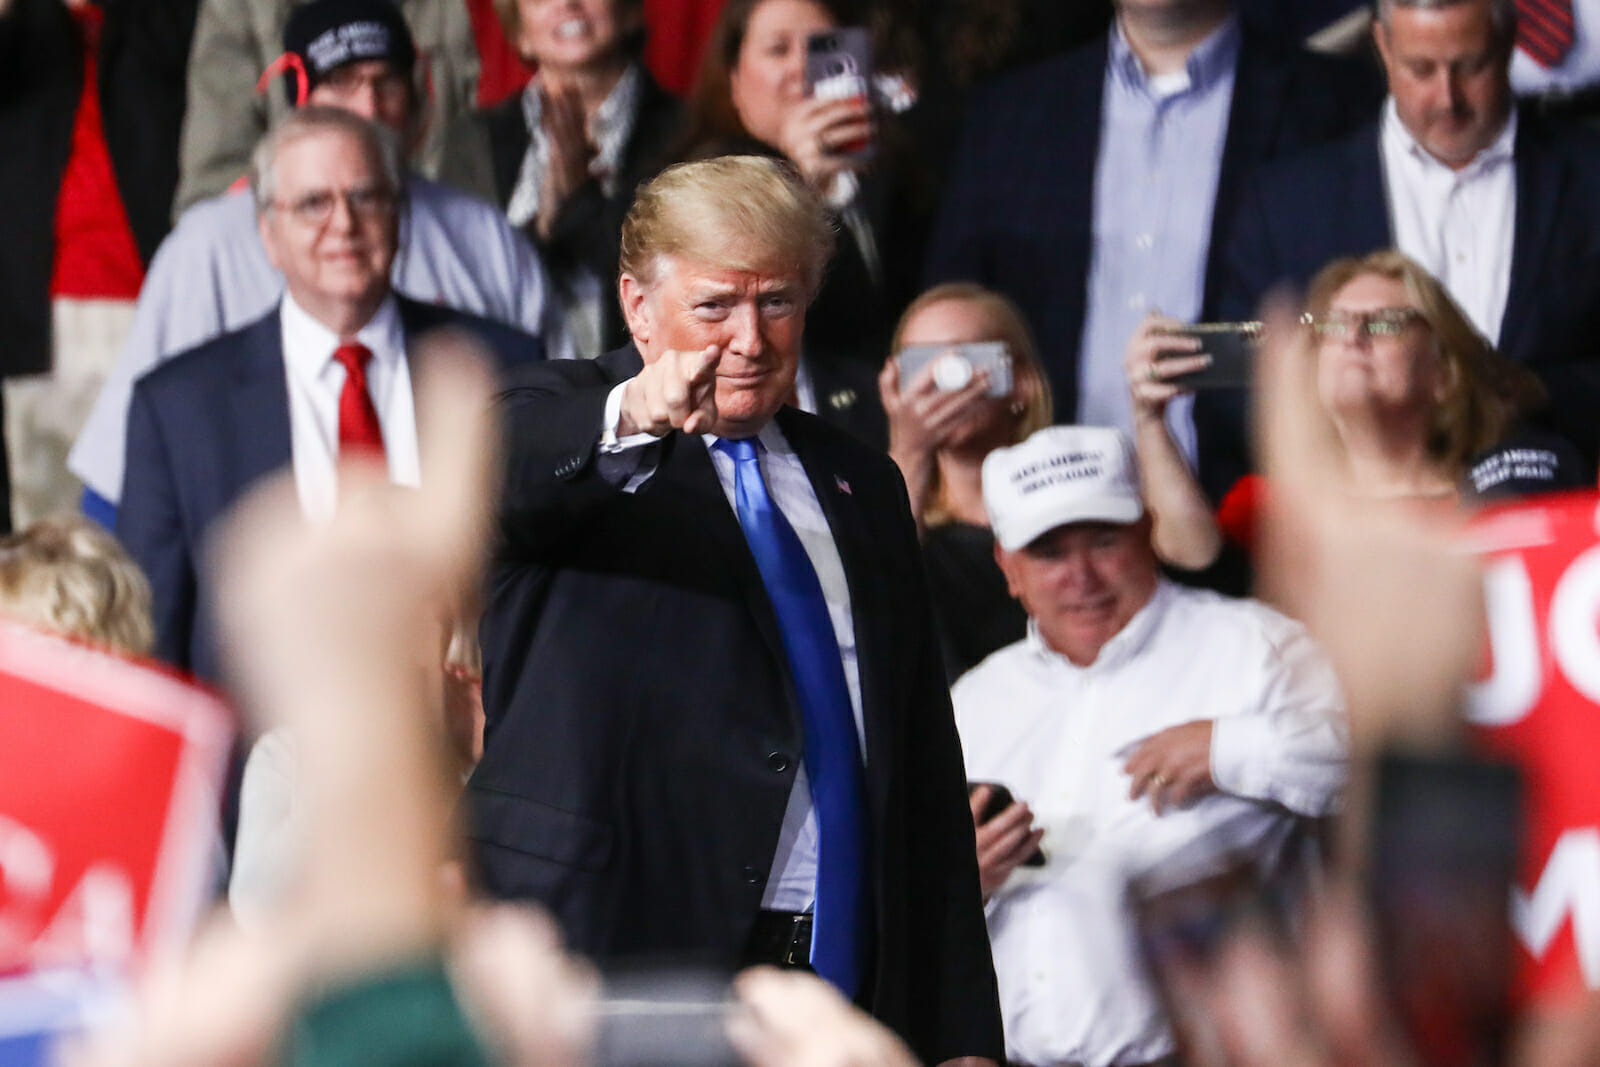 Donald Trump pointing to his supporters during a rally